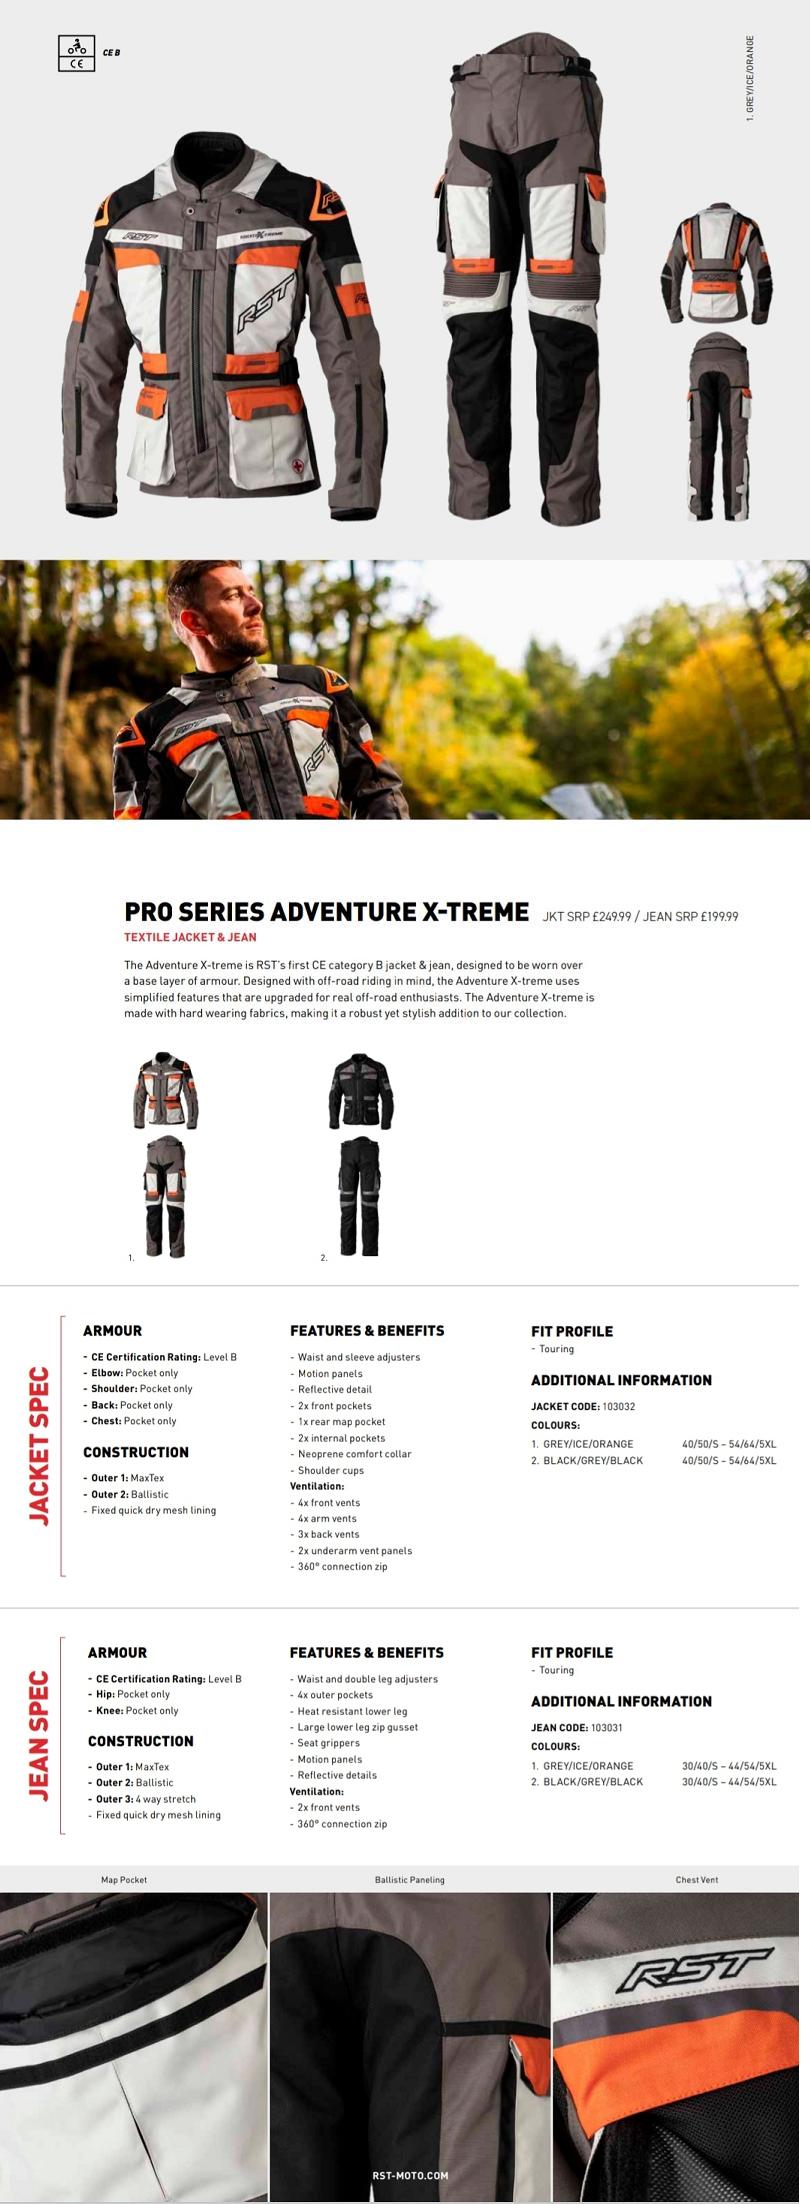 RST Pro Series Adventure Xtreme textile jacket and pant